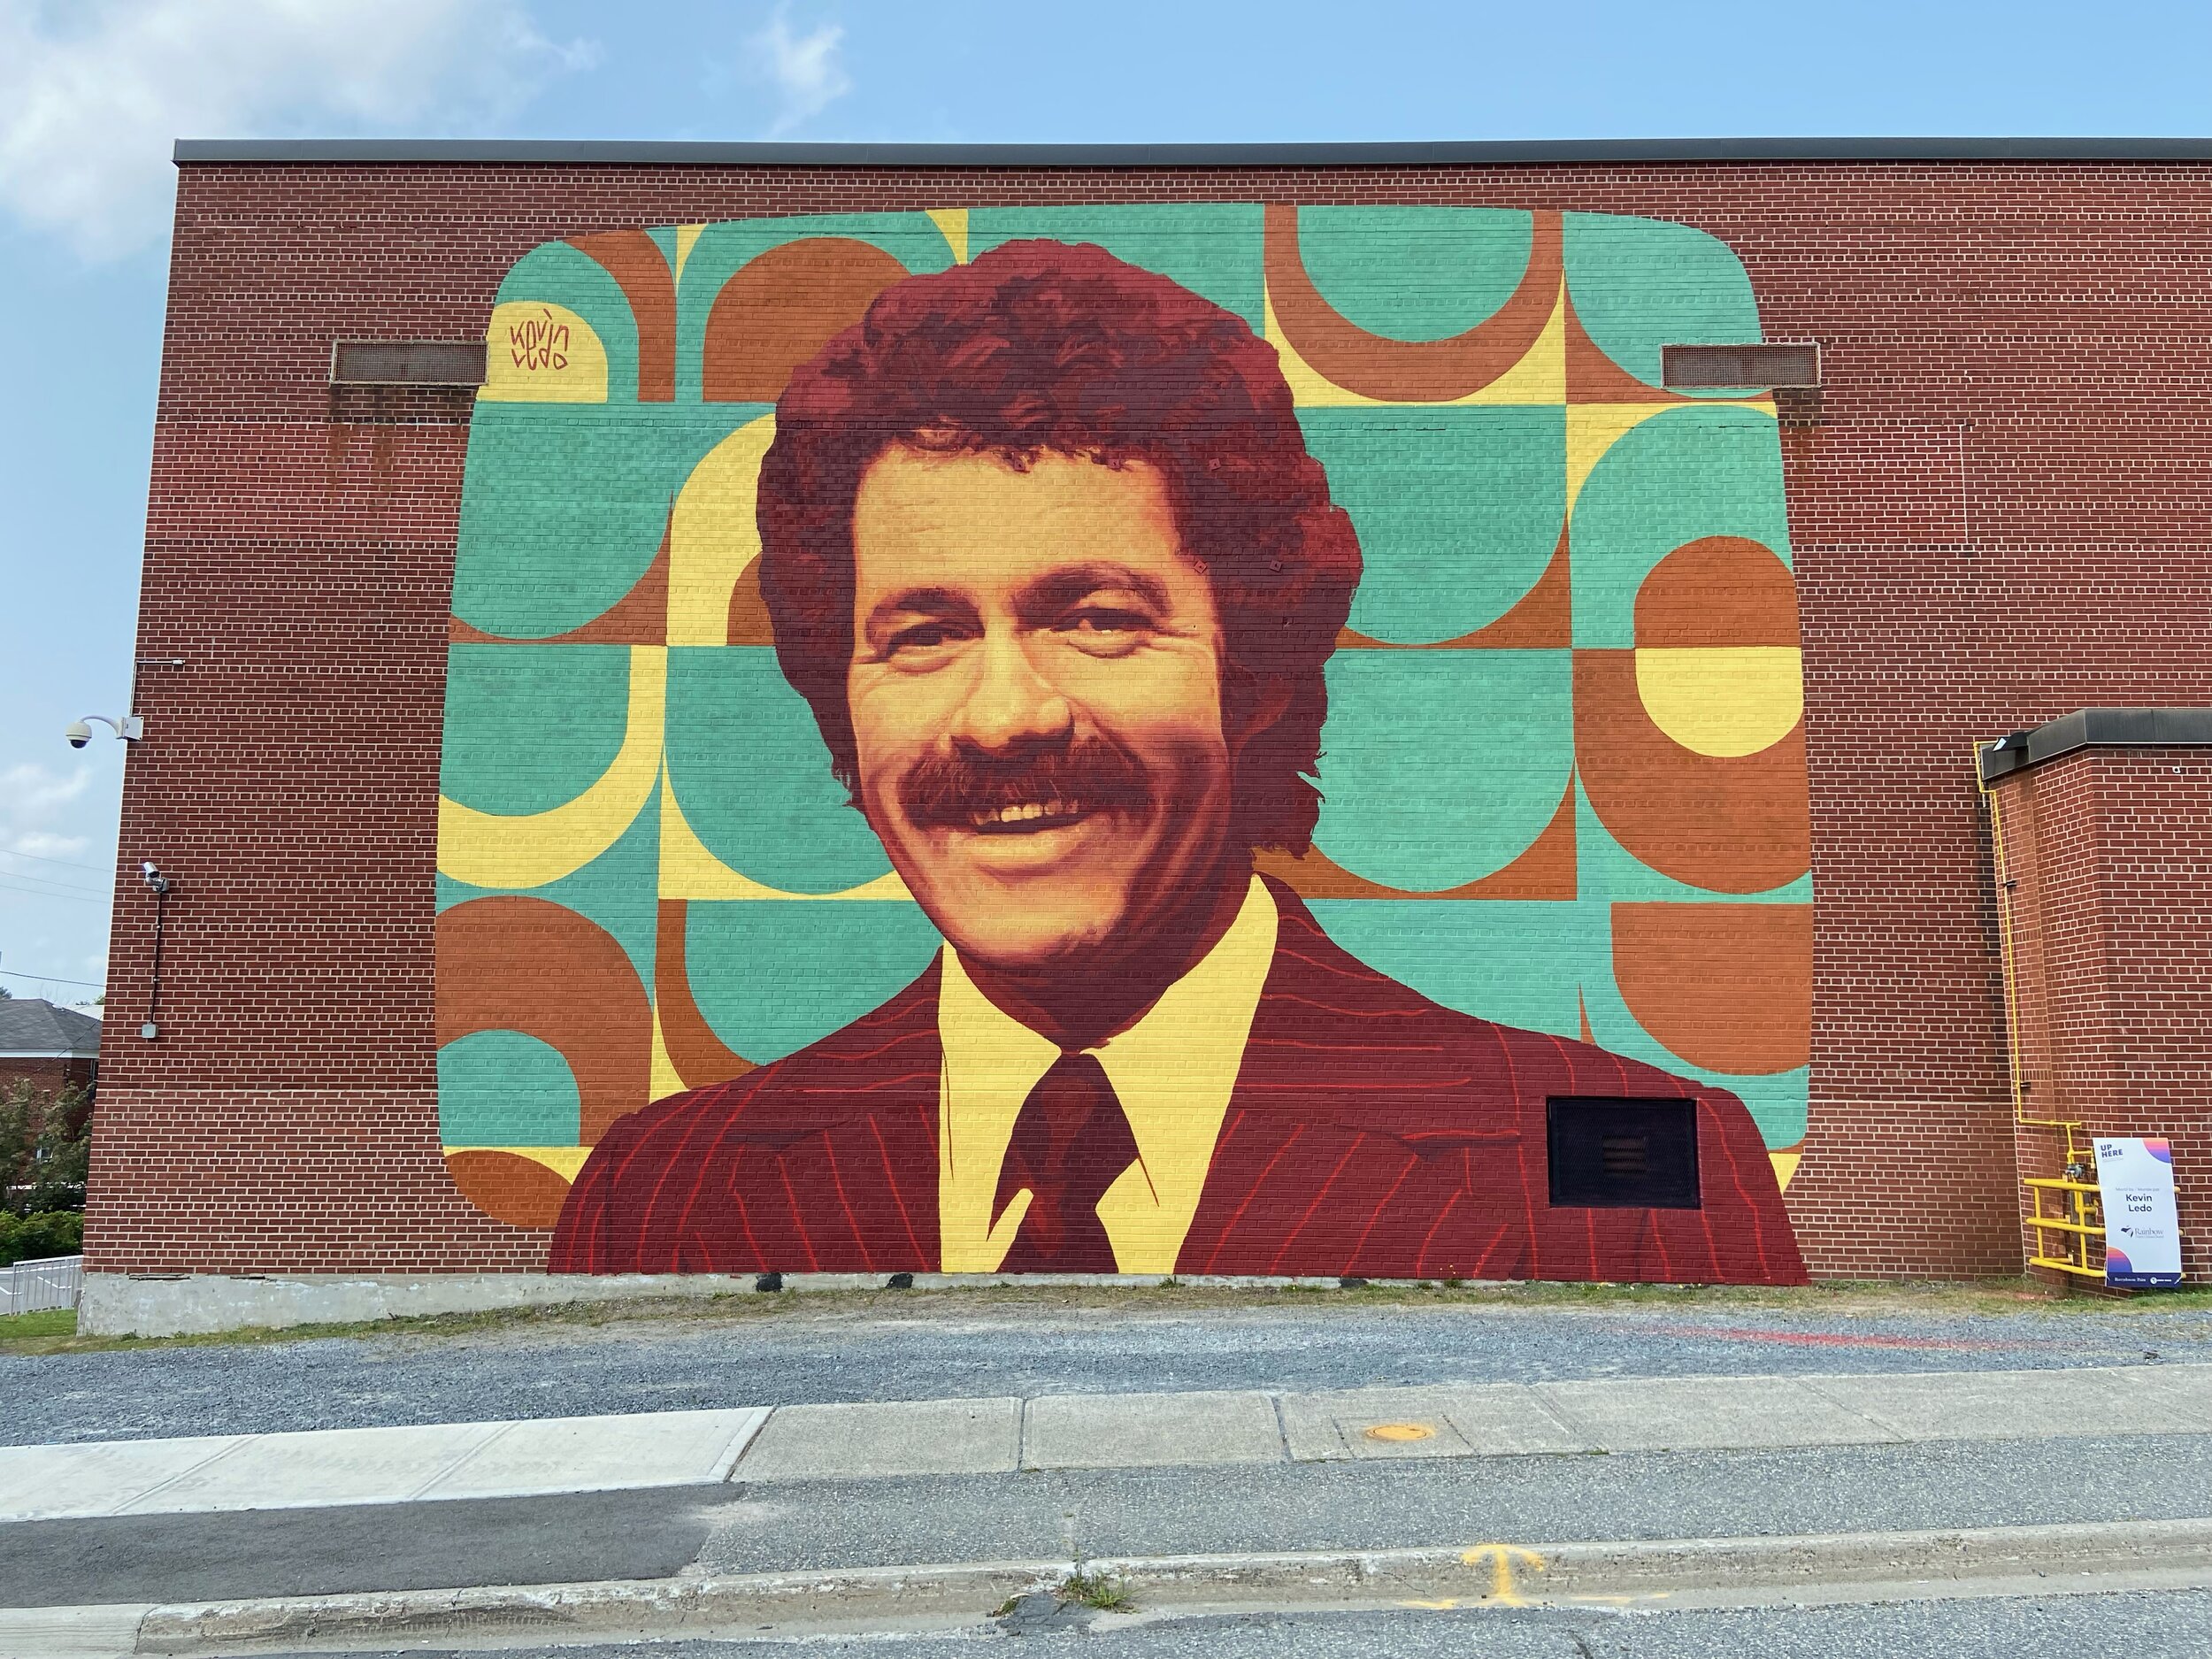 A large outdoor mural of Alex Trebek; a smiling man with brown hair and a moustache wearing a brown suit and tie in front of a turquoise and yellow patterned background.